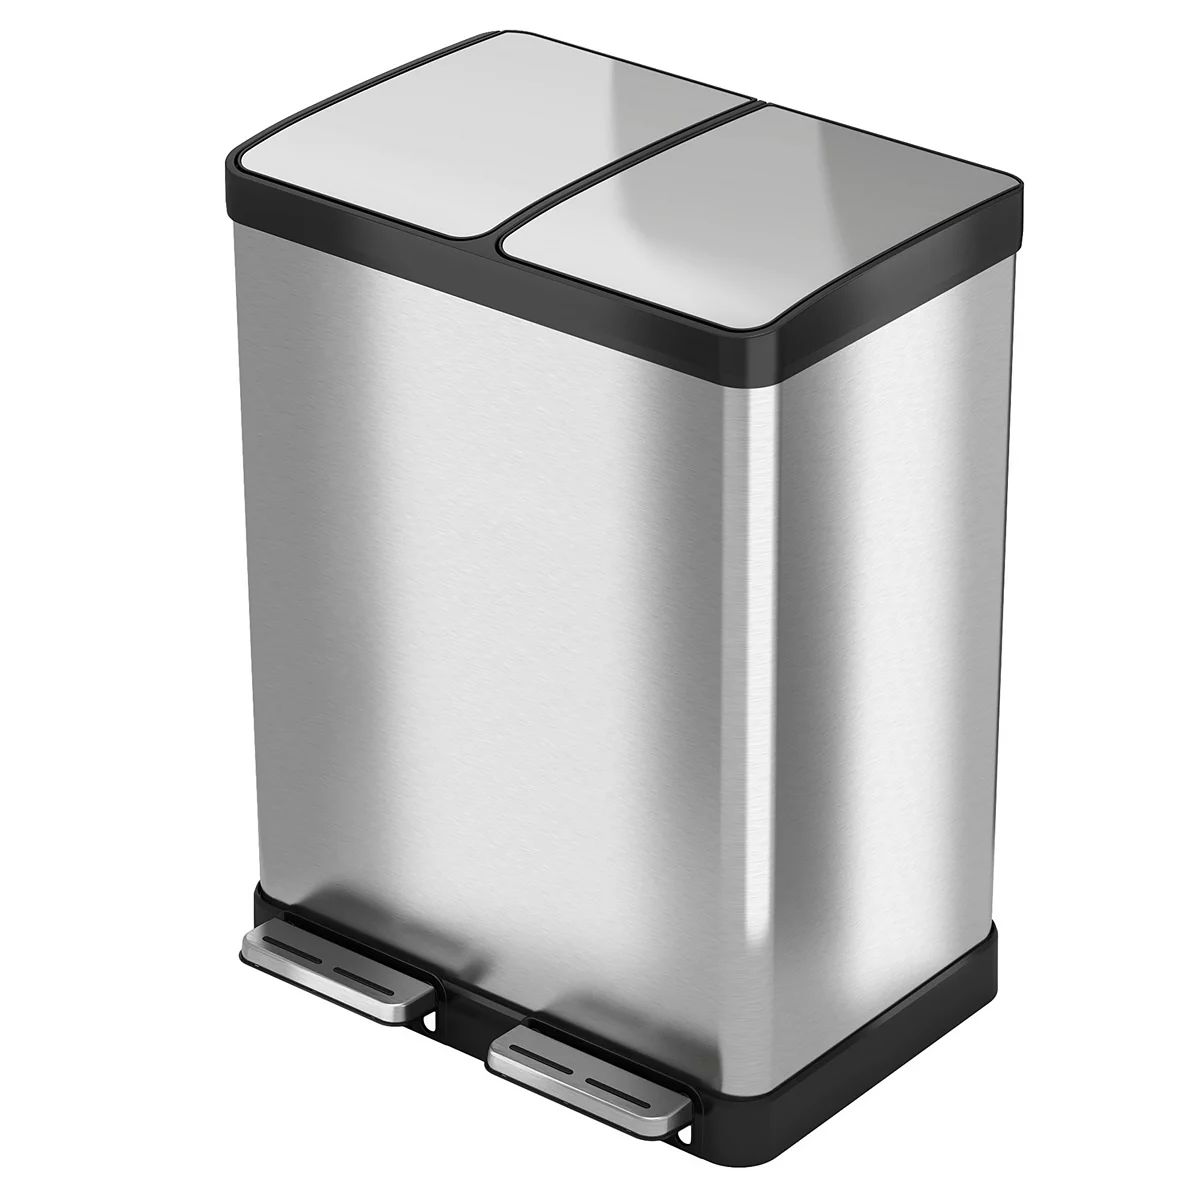 Halo Premium SoftStep 16-Gallon Stainless Steel Step Recycler Trash Can | Kohl's